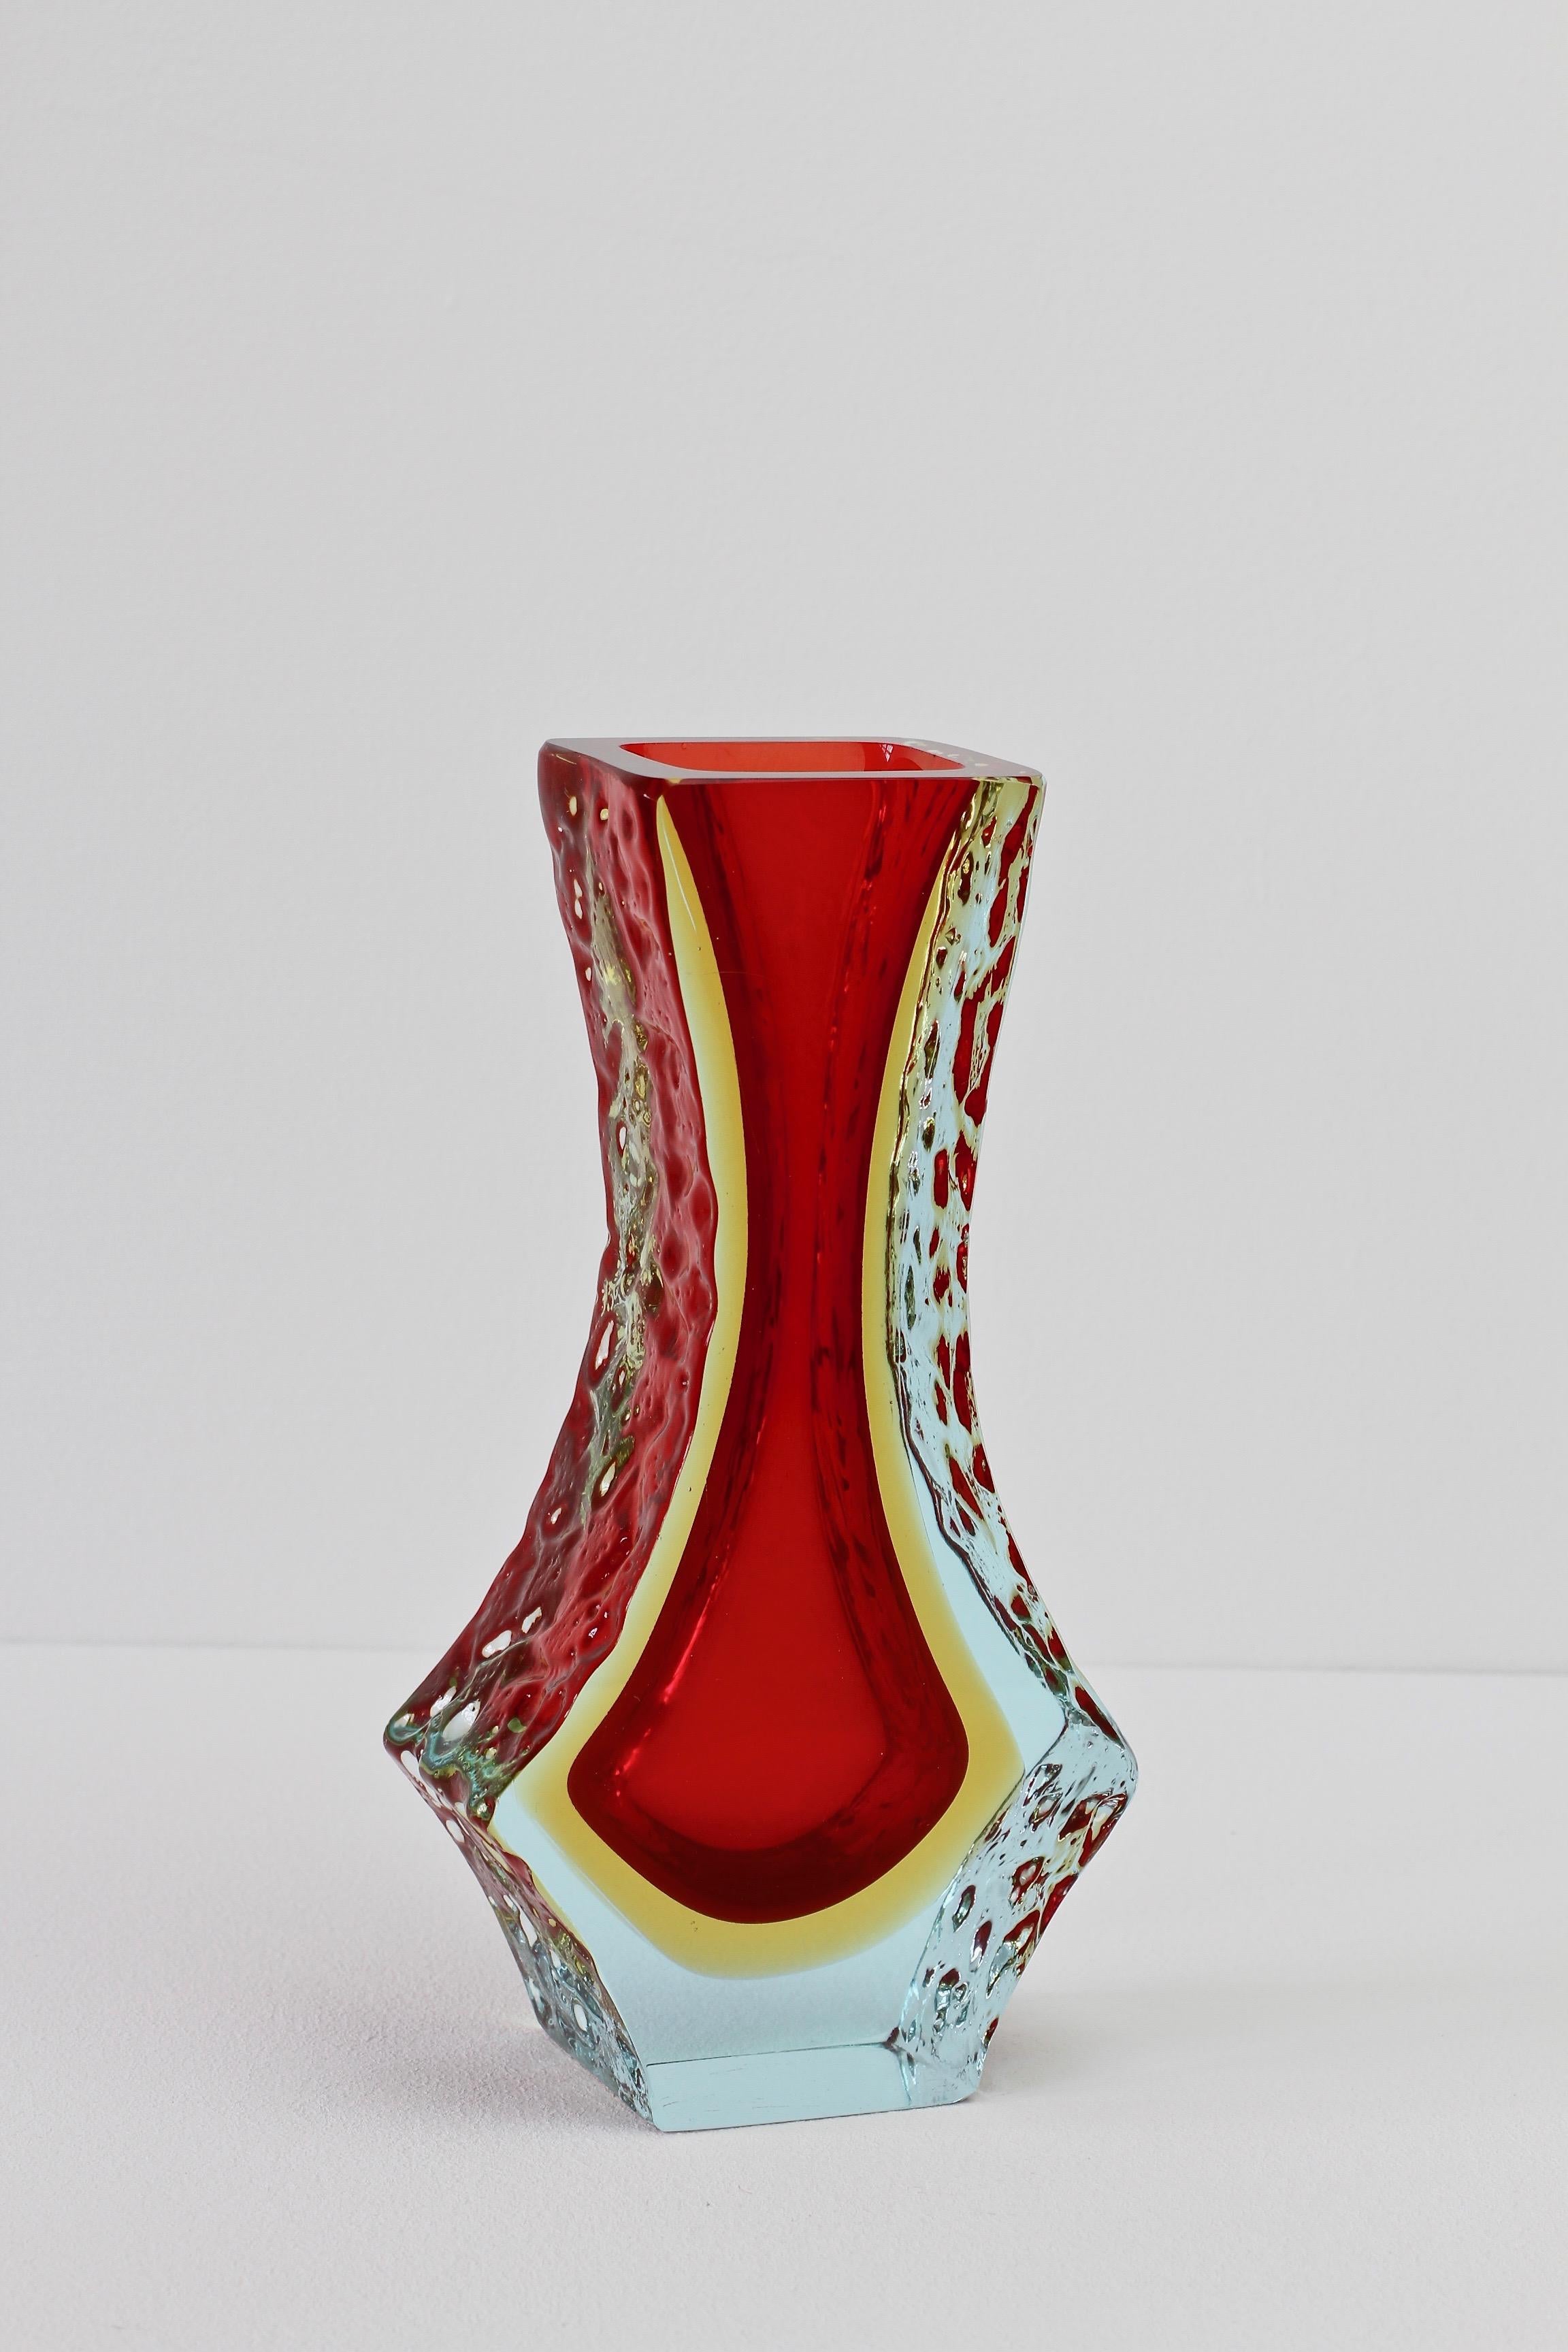 Vintage Italian midcentury textured Murano art glass vase attributed to Mandruzzato. Beautiful color (color) combination of light blue over yellow over ruby red- the textured 'Sommerso' ice glass looks simply stunning.